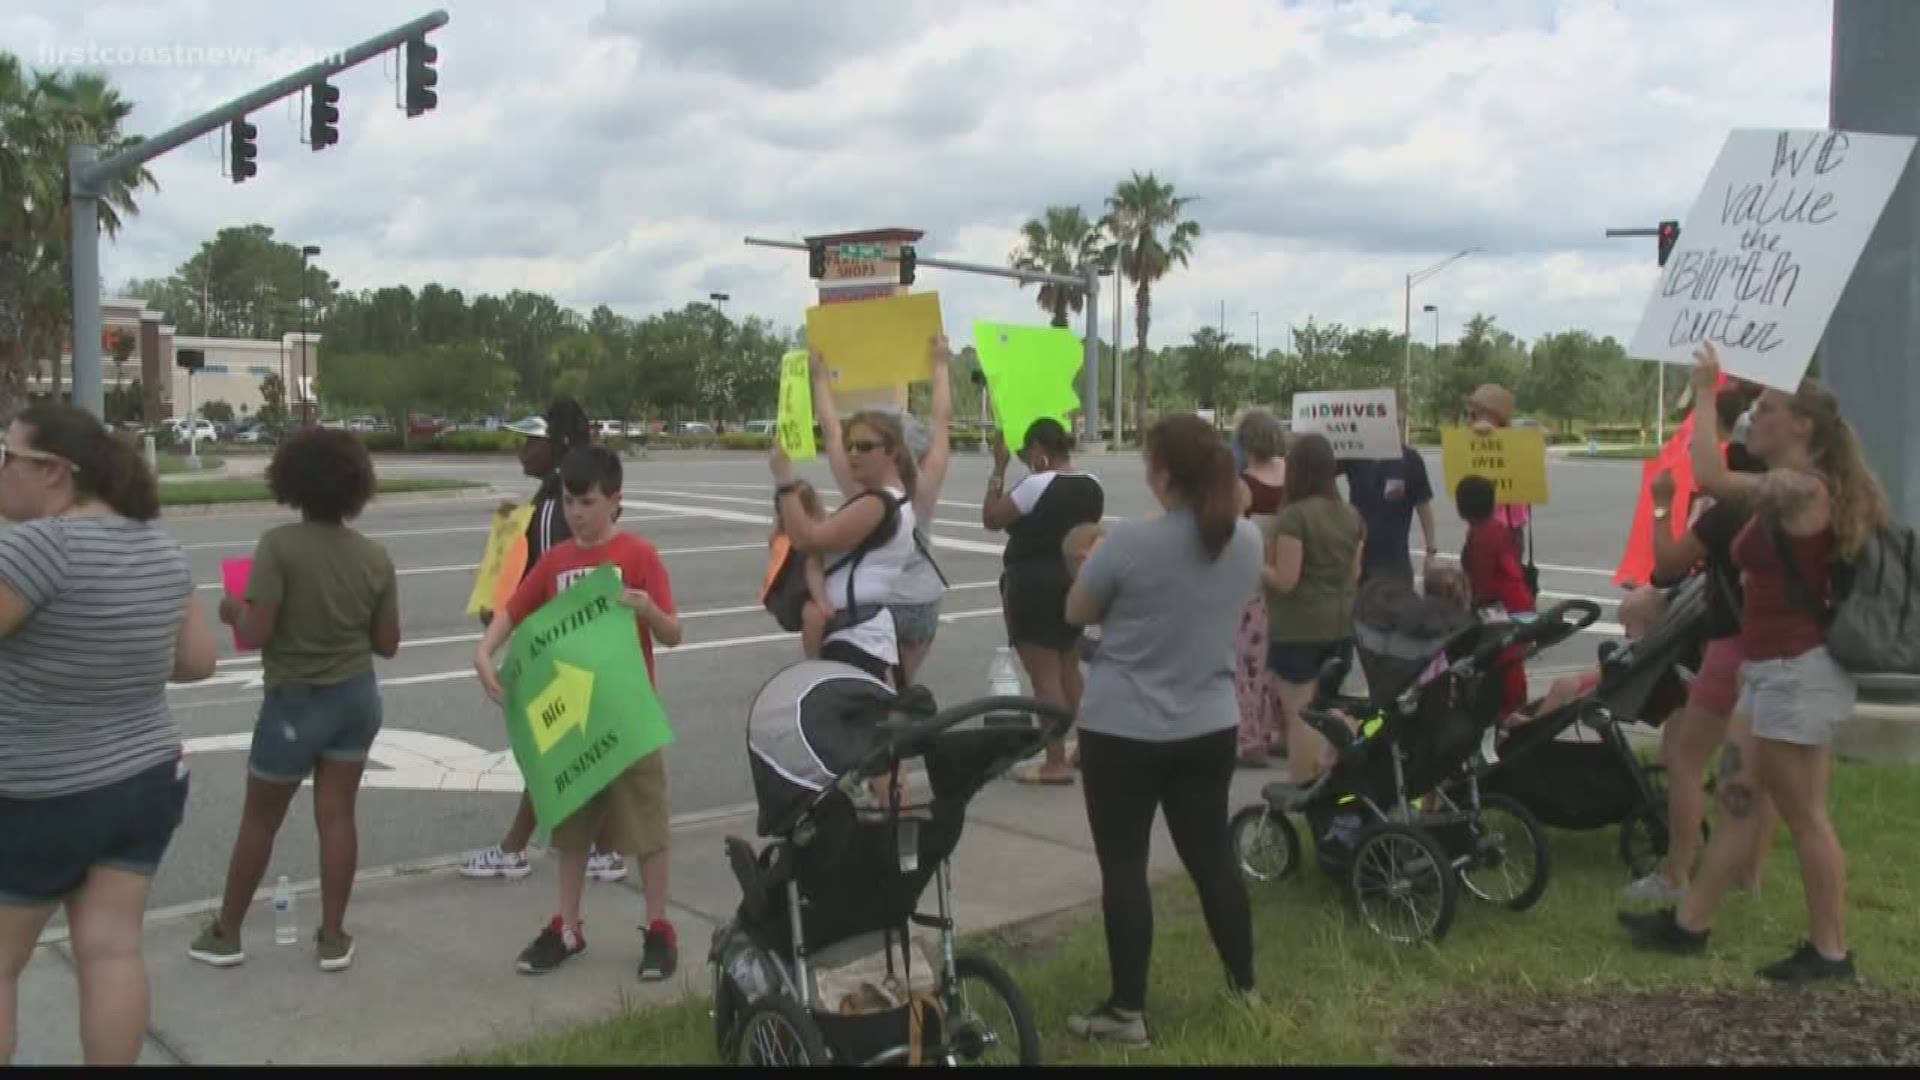 Sarah Locke, a mom who organized the protest, told First Coast News she gave birth in the birth center to her son Bennett on July 31, 2018.